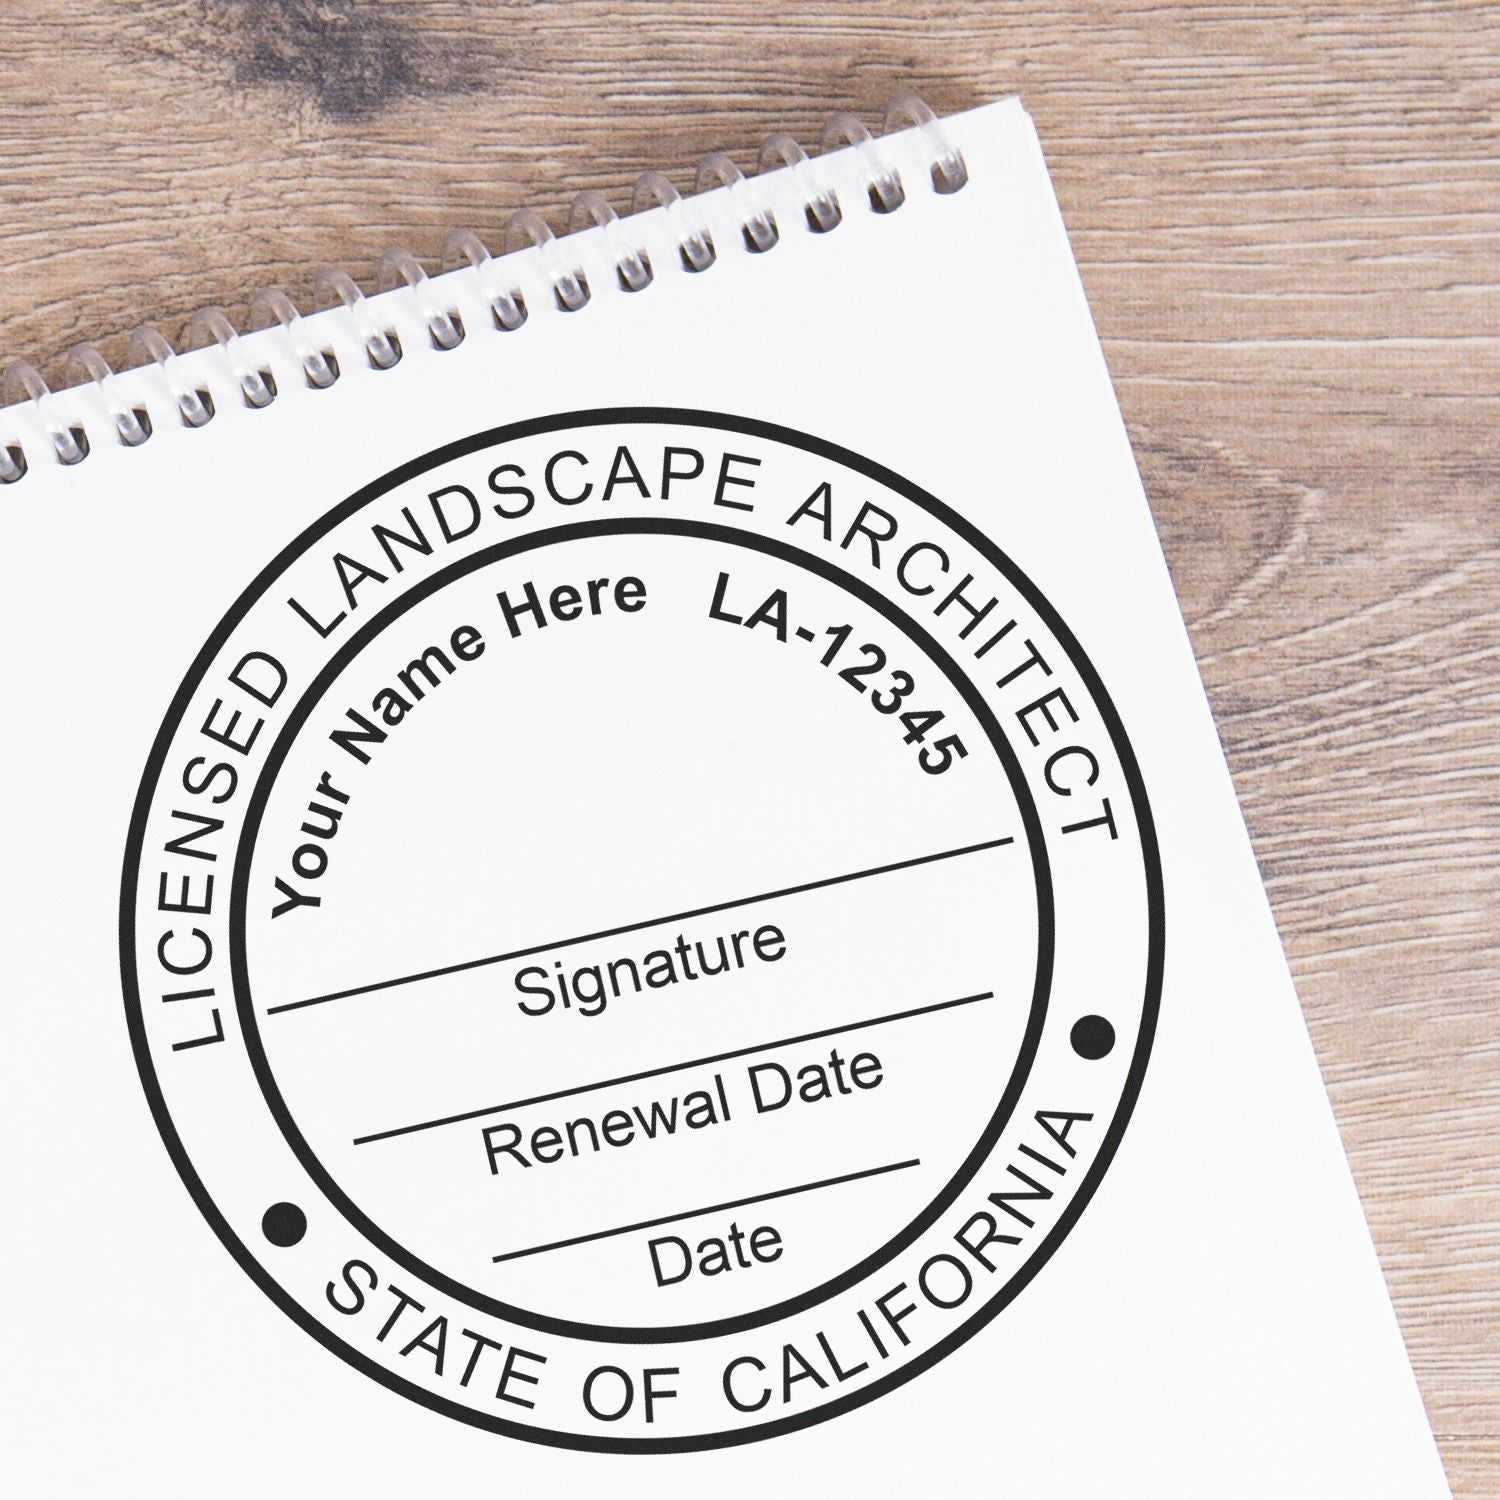 Seal Your Success: California Landscape Architect Seal Guide Feature Image